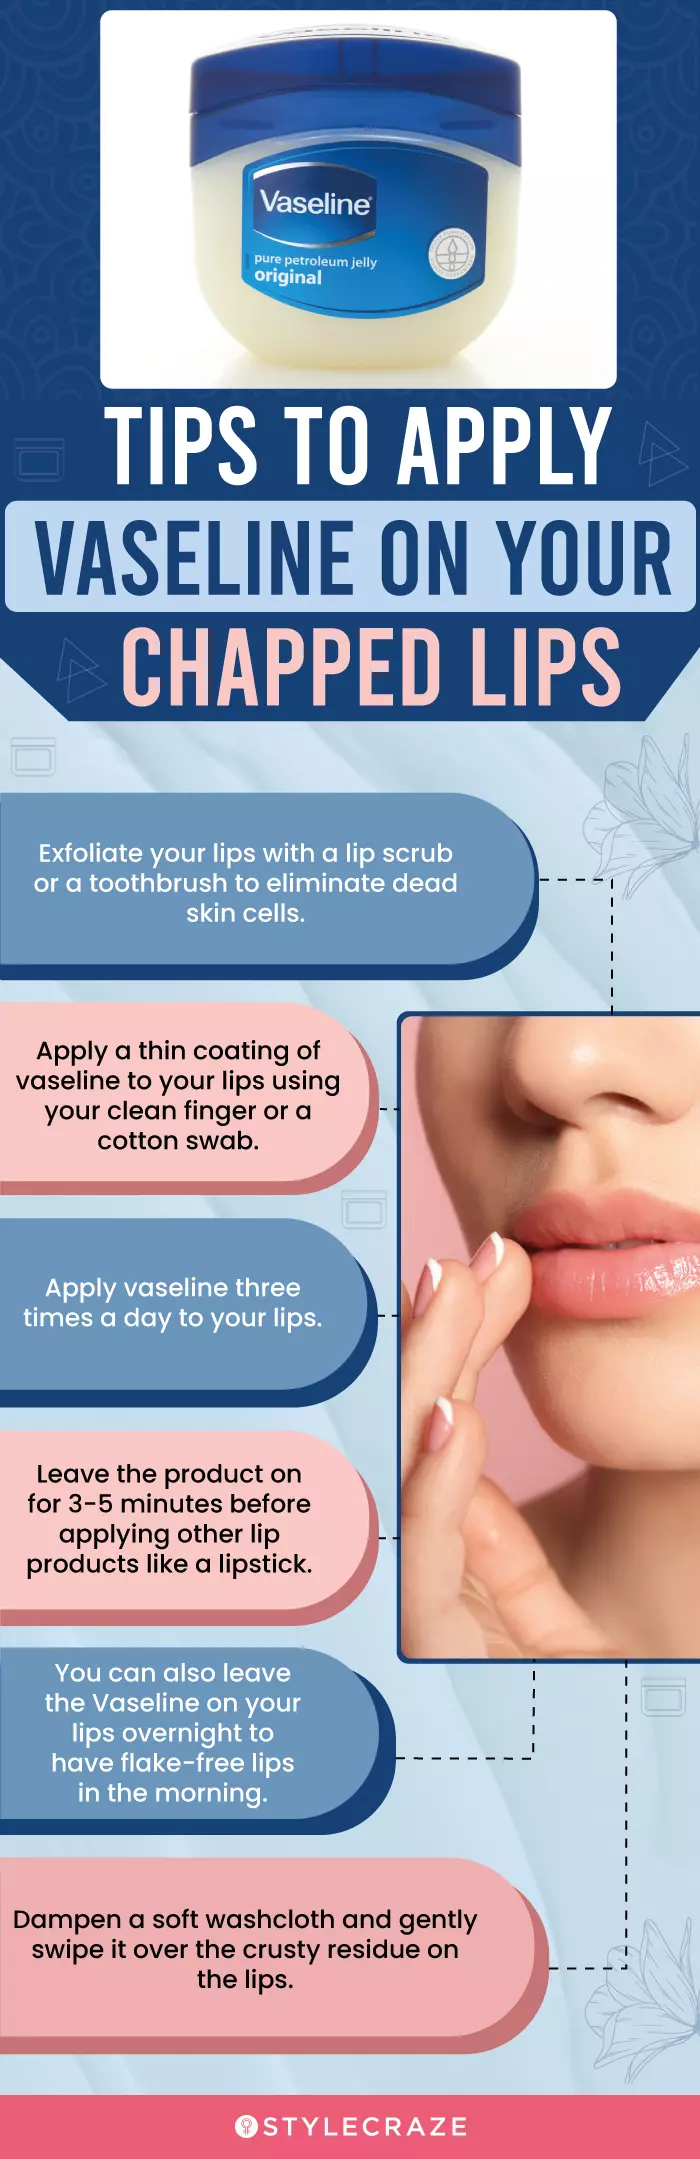 Tips To Apply Vaseline On Your Chapped Lips (infographic)